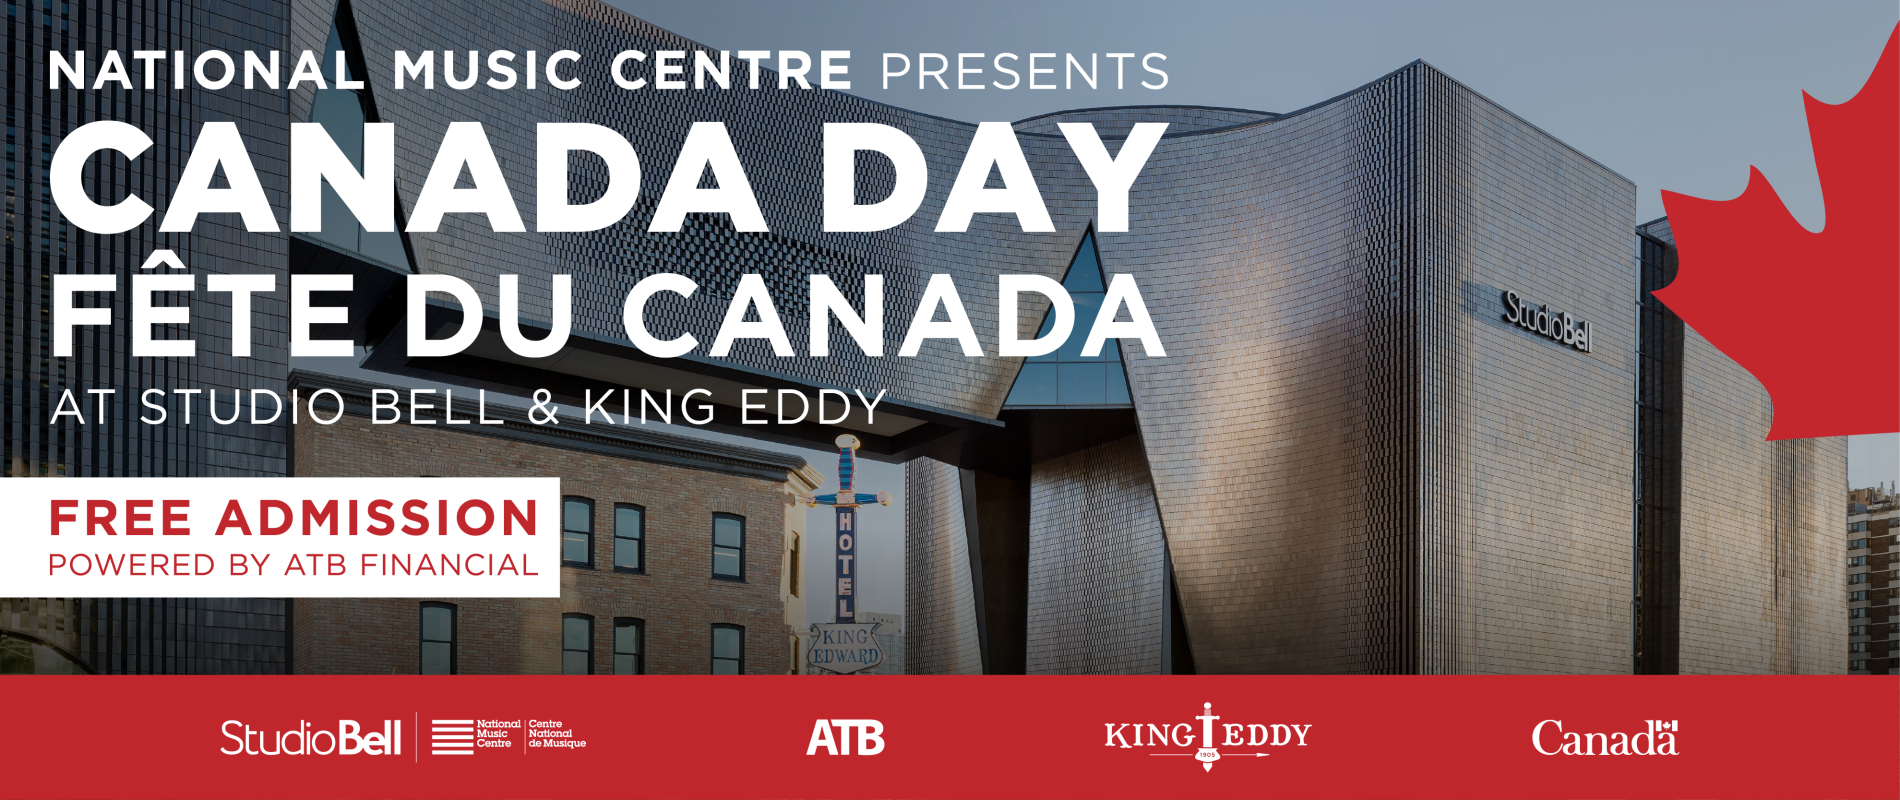 NMC Presents Canada Day at Studio Bell & King Eddy